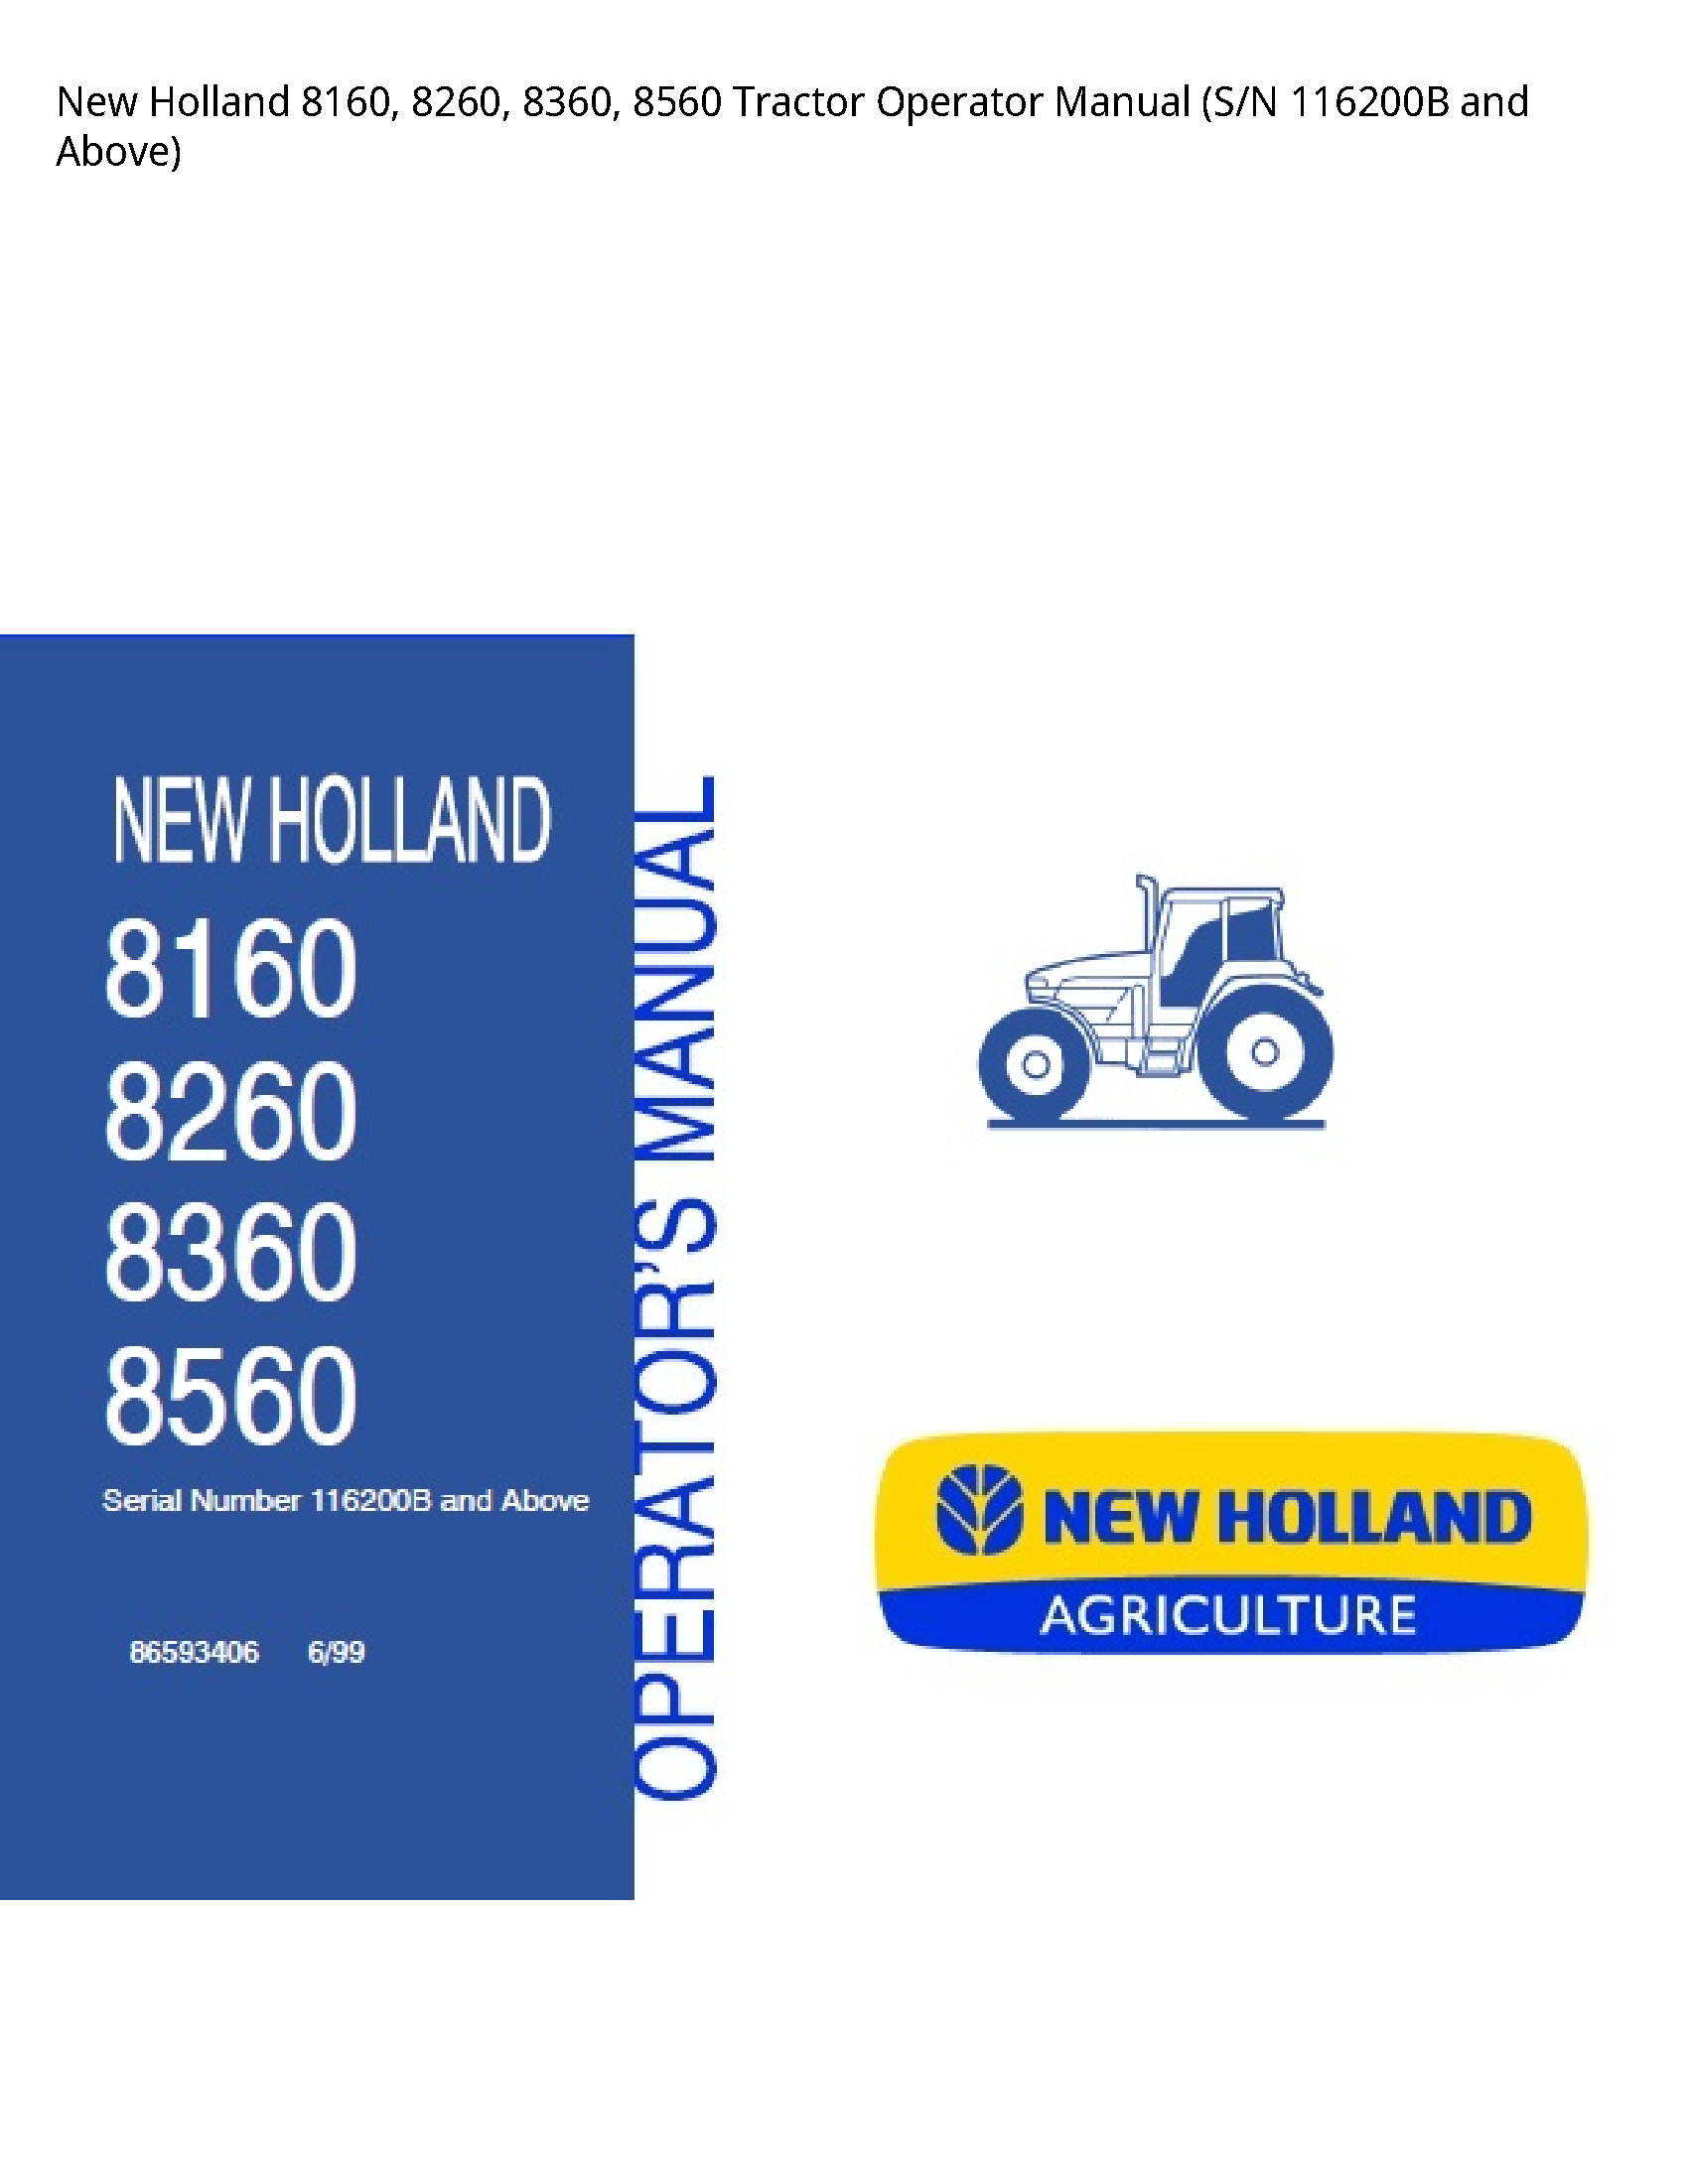 New Holland 8160 Tractor Operator manual